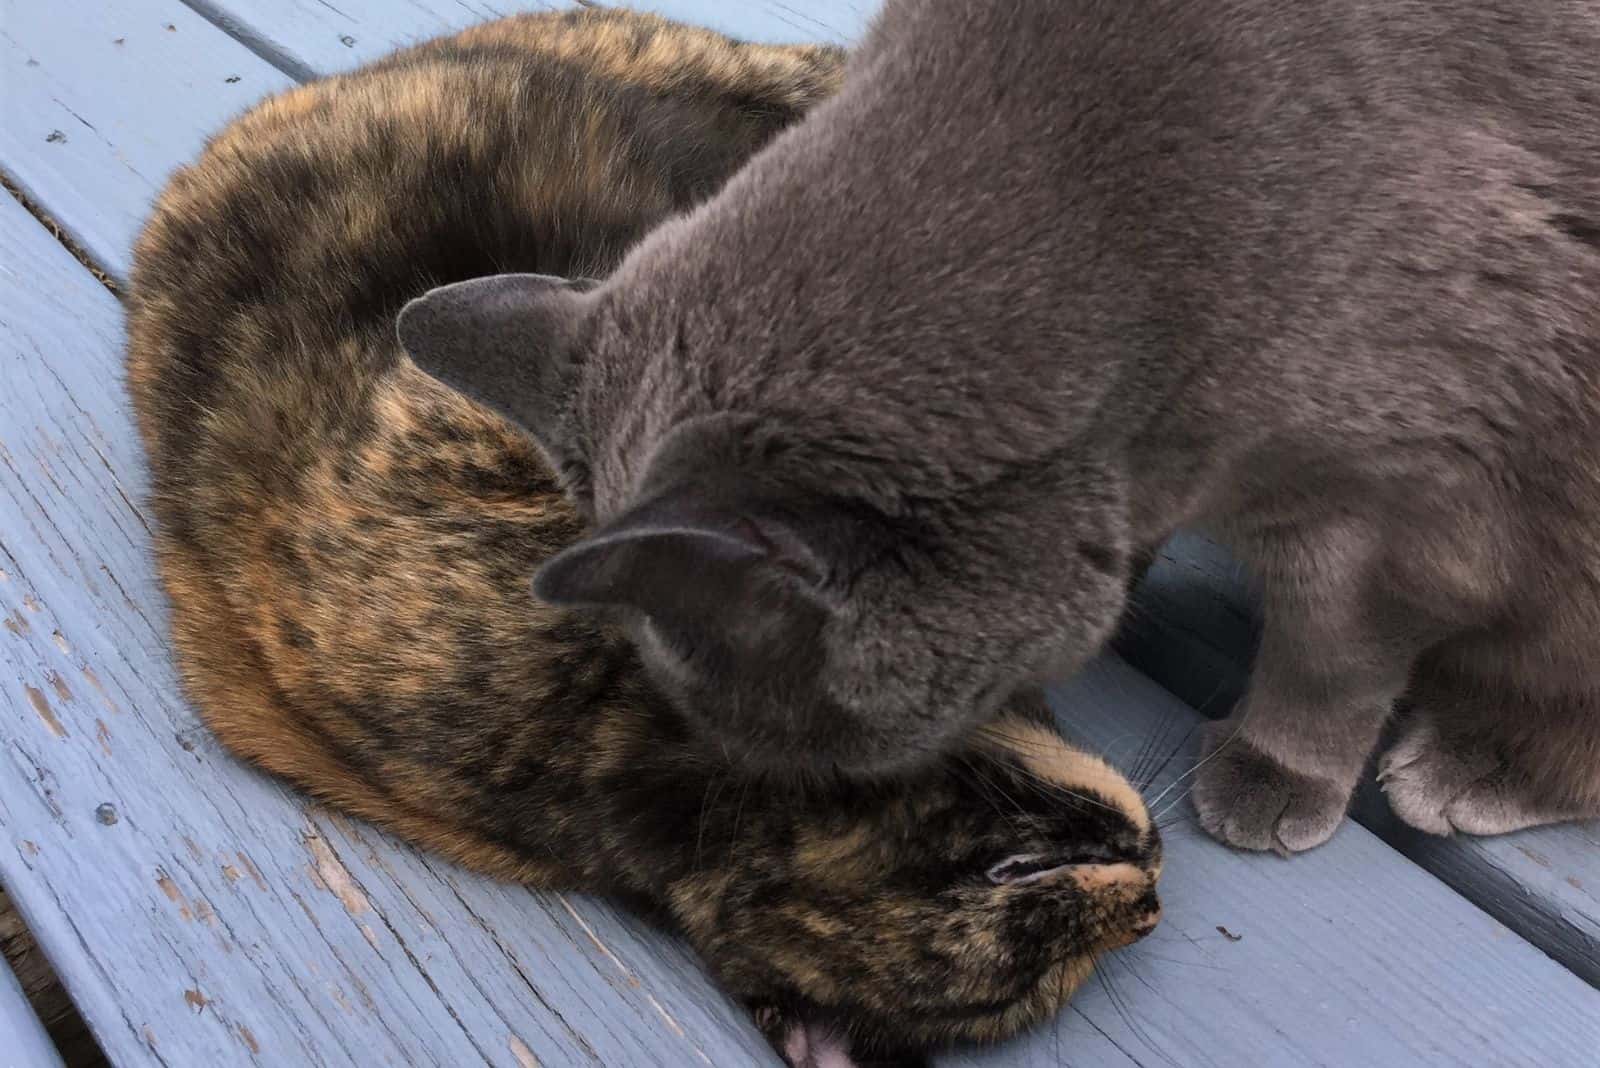 A gray Russian Blue cat biting the neck of a Calico cat outdoors on a wooden deck